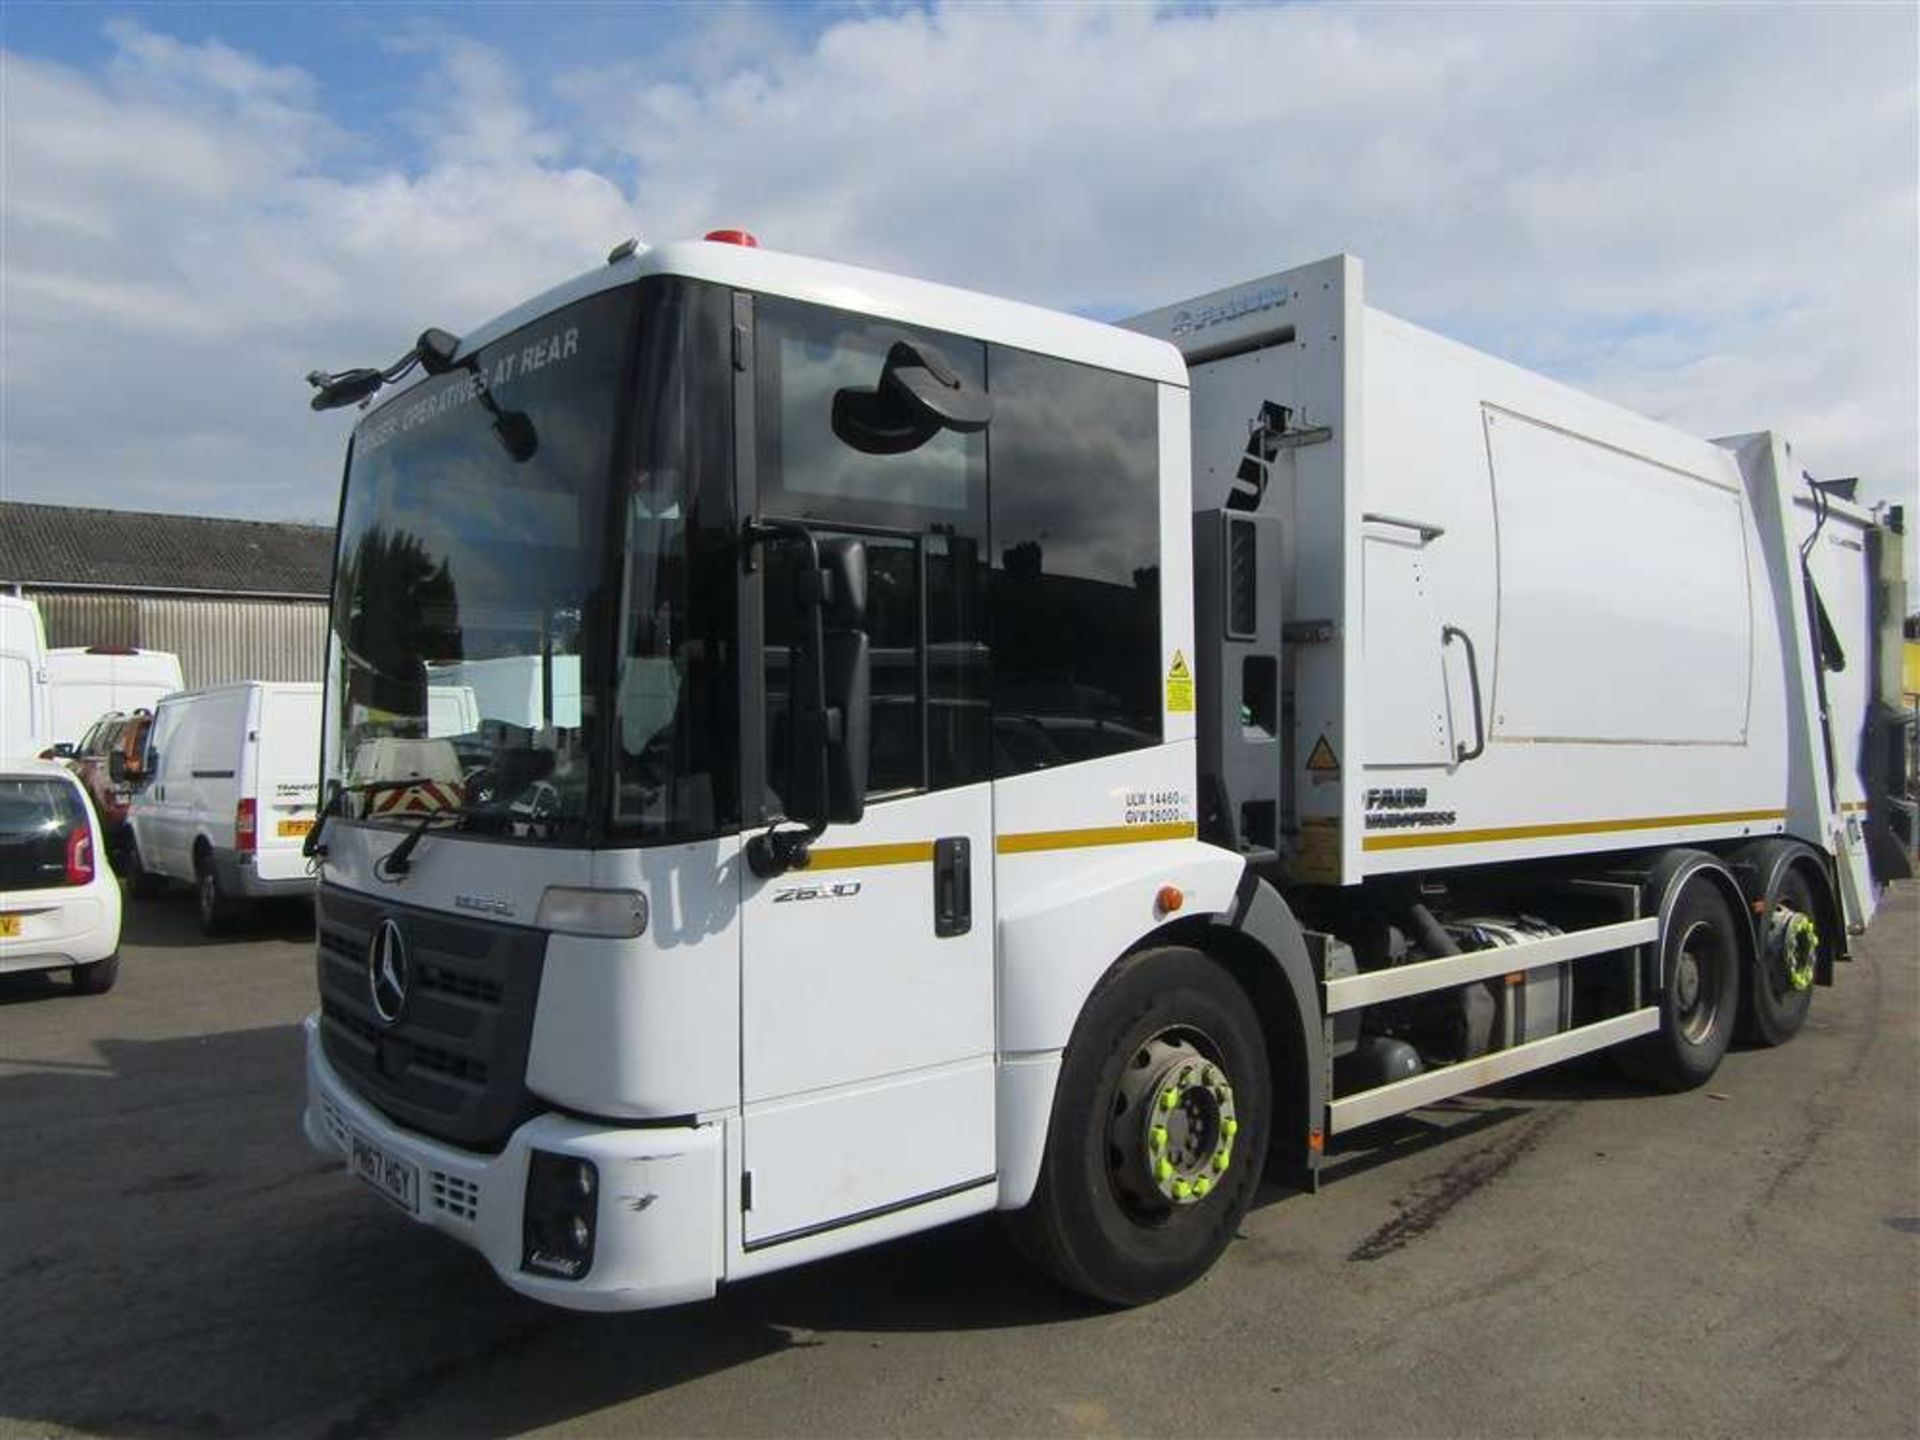 2017 67 reg Mercedes 2630 Refuse Wagon (Direct Council) - Image 2 of 6